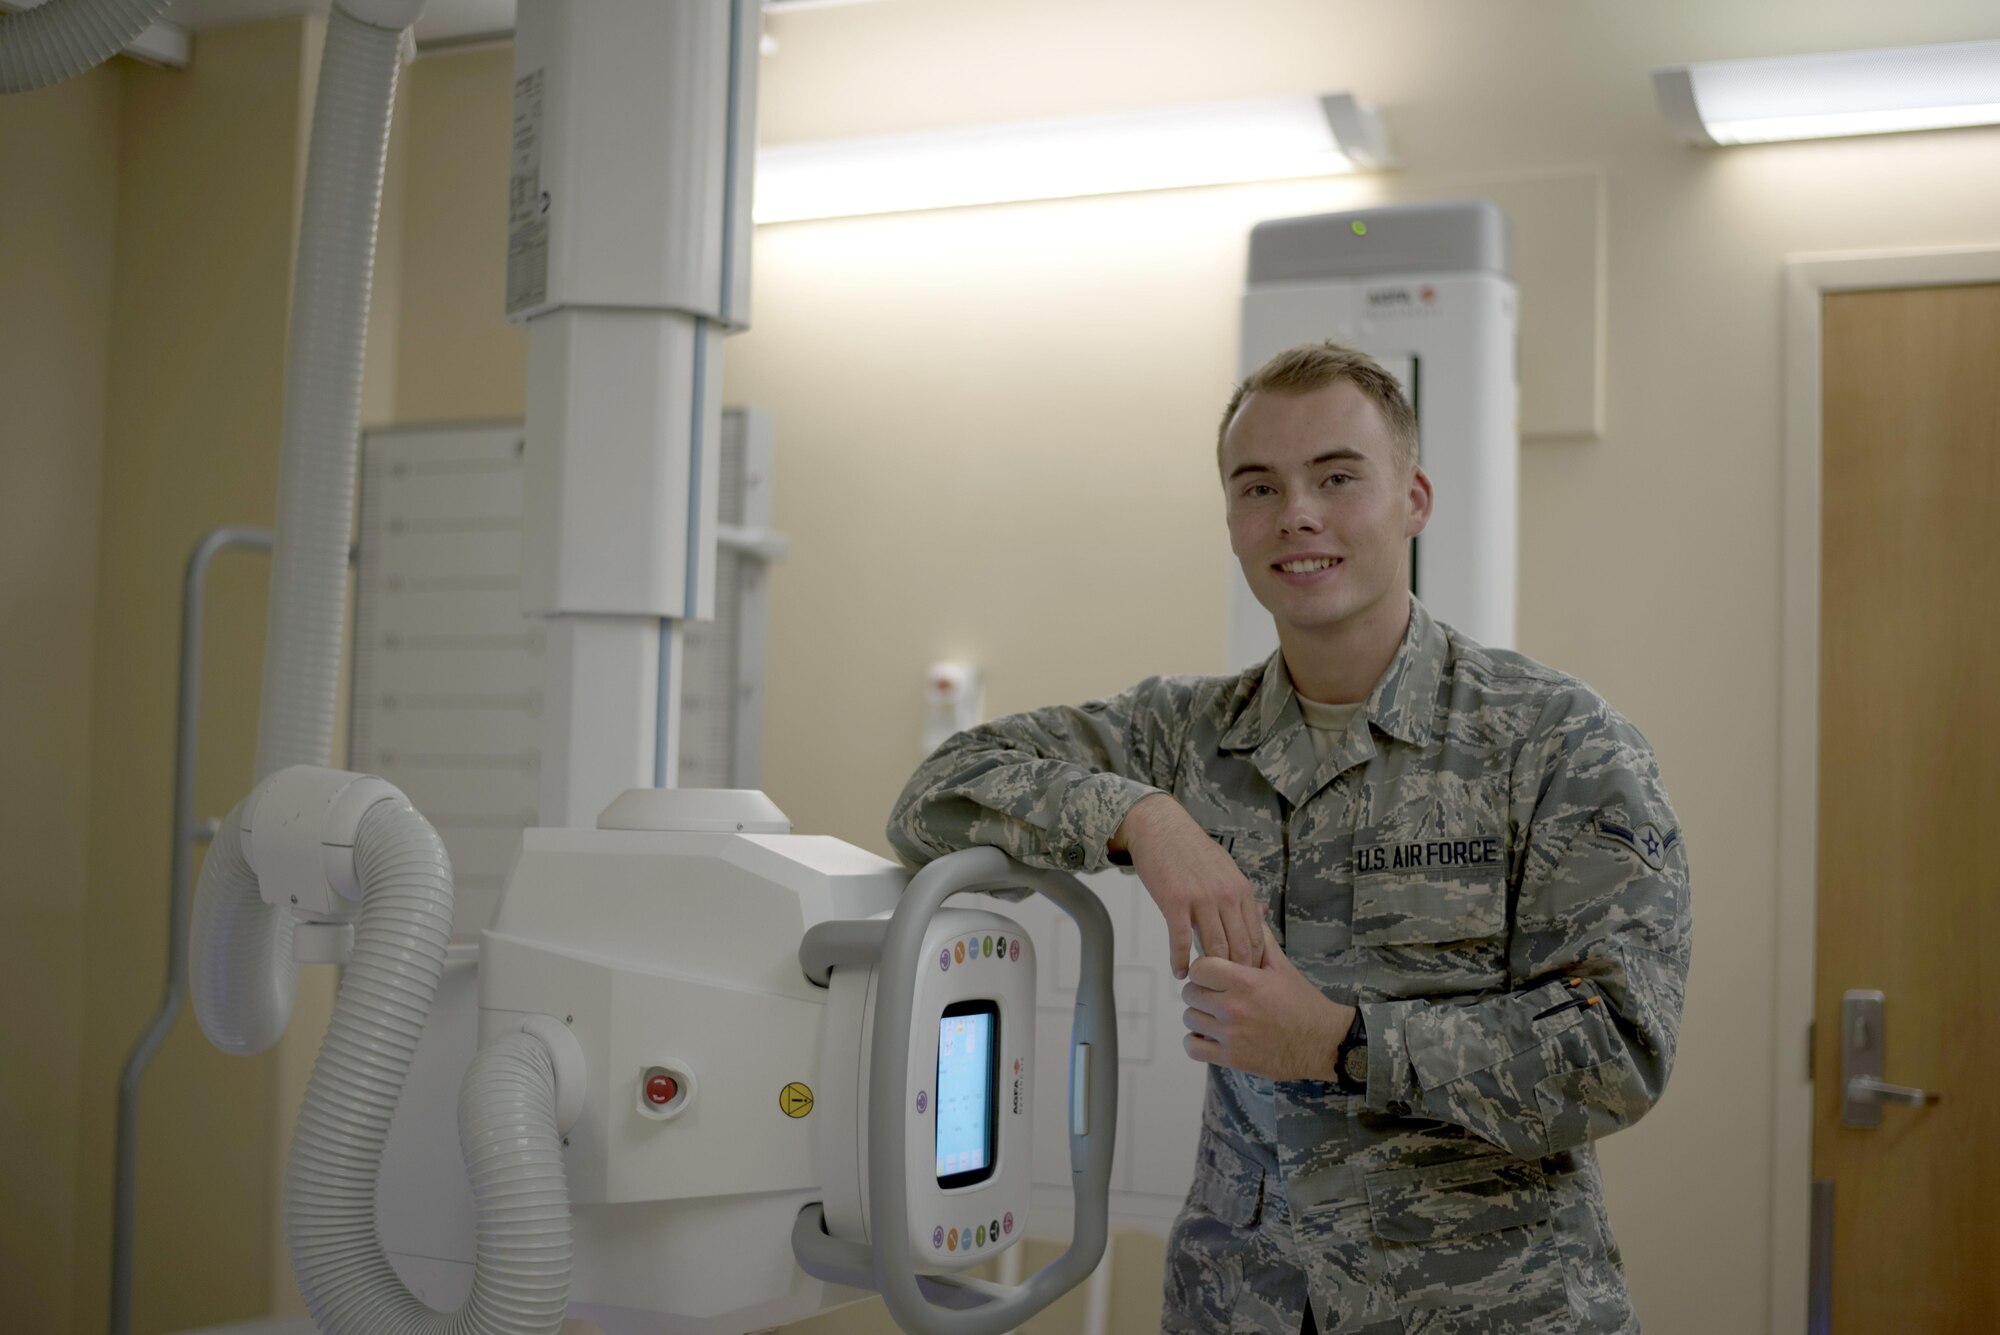 U.S Air Force Airman Byraun Howell, a radiology student assigned to the 6th Medical Support Squadron, pauses for a photo with equipment used to perform his job duties at MacDill Air Force Base, Fla., Aug. 16, 2017.